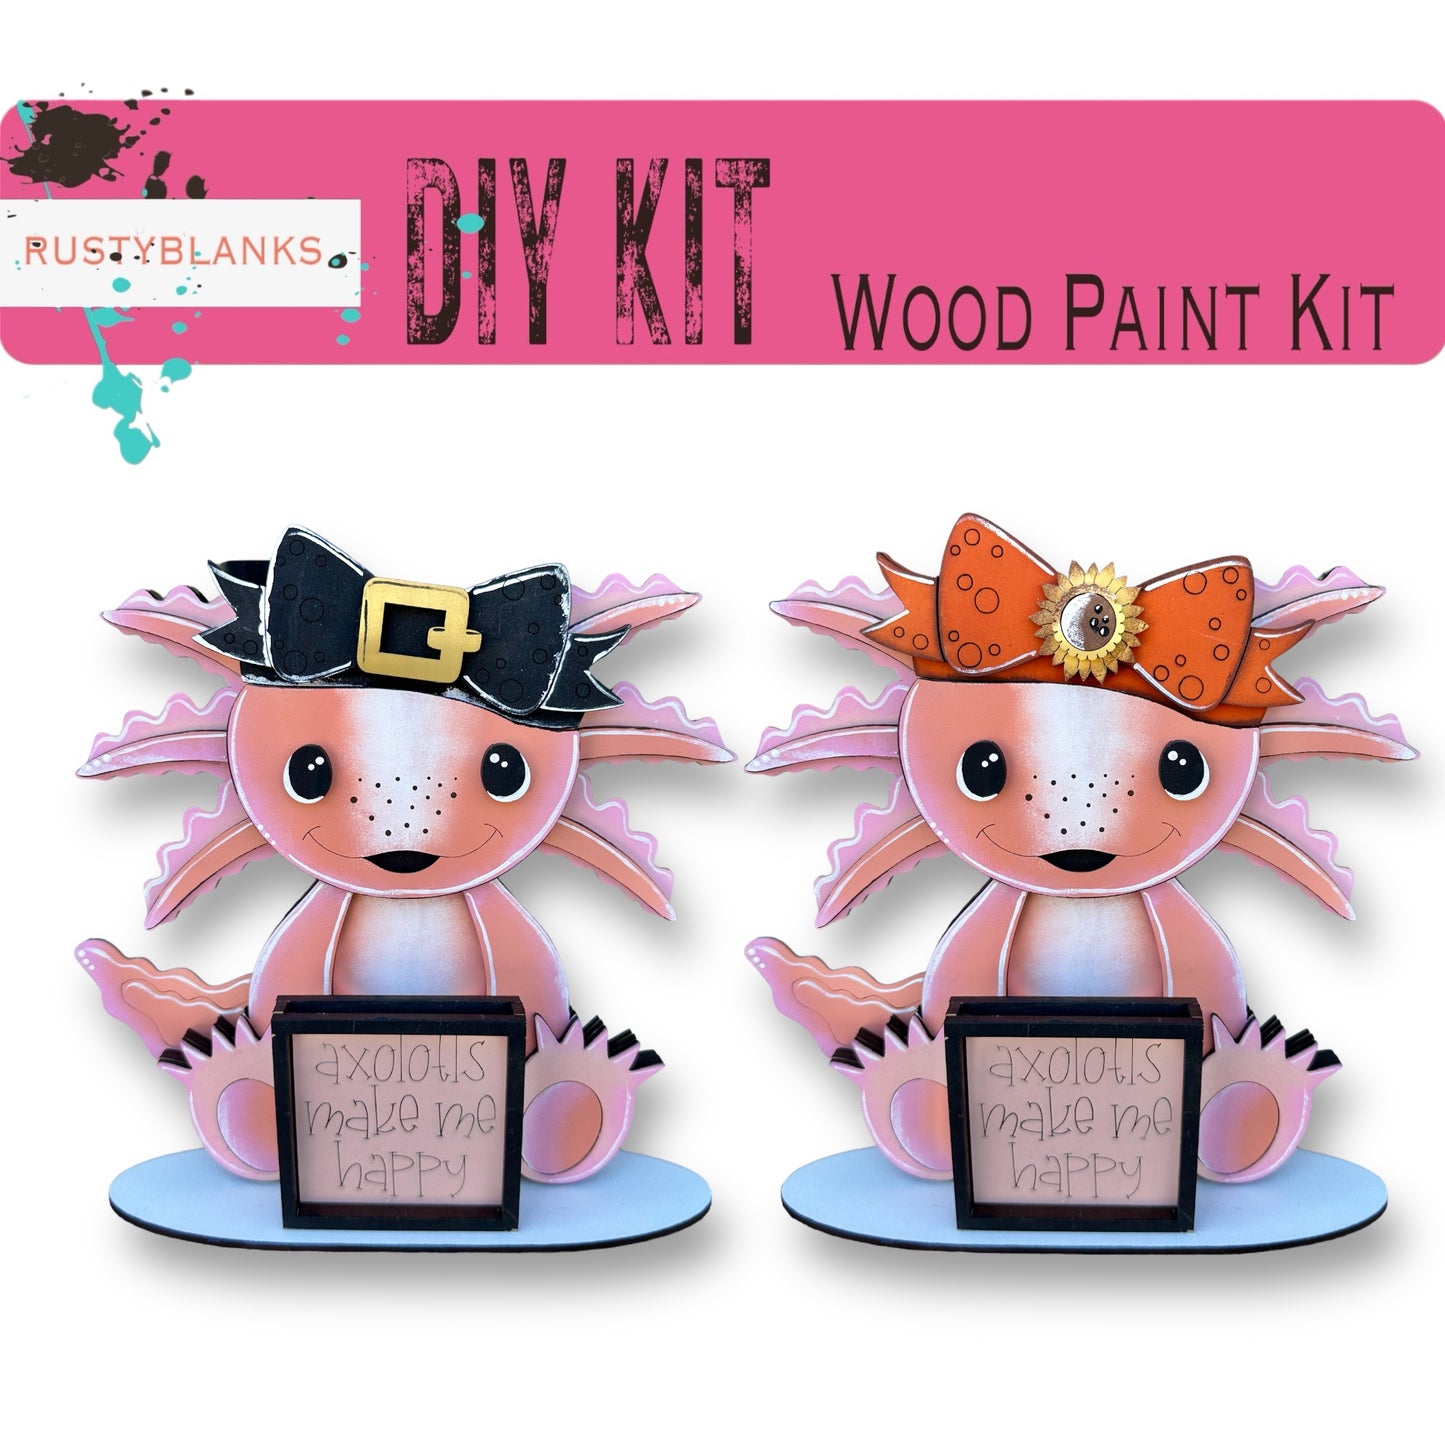 a picture of a pair of wood paint kits